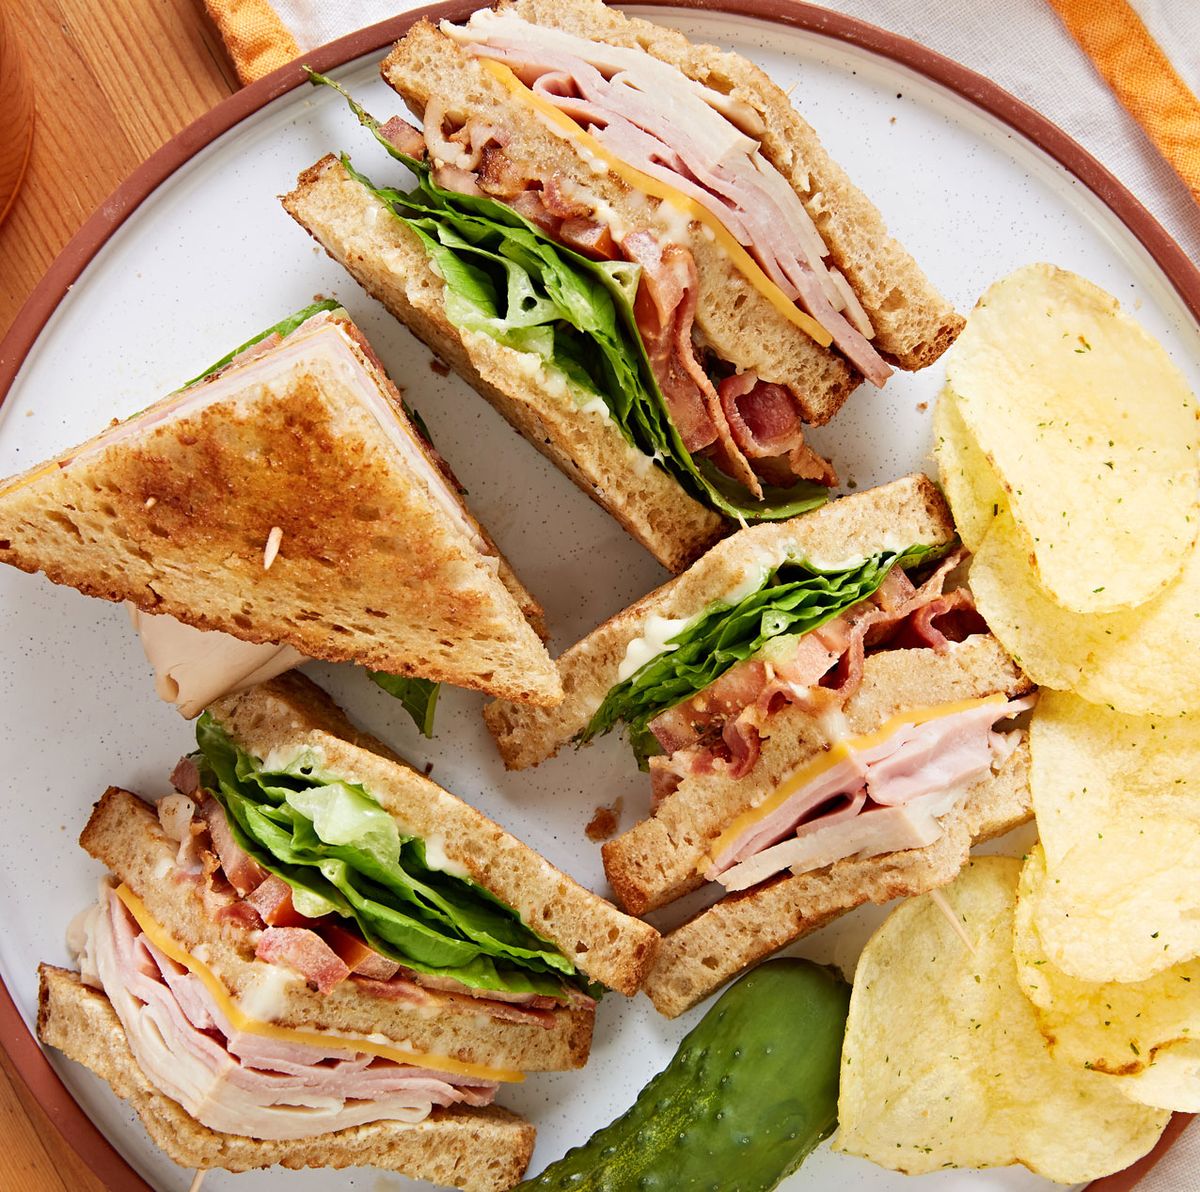 5 Of The Best Sandwich Makers You Can Find Online